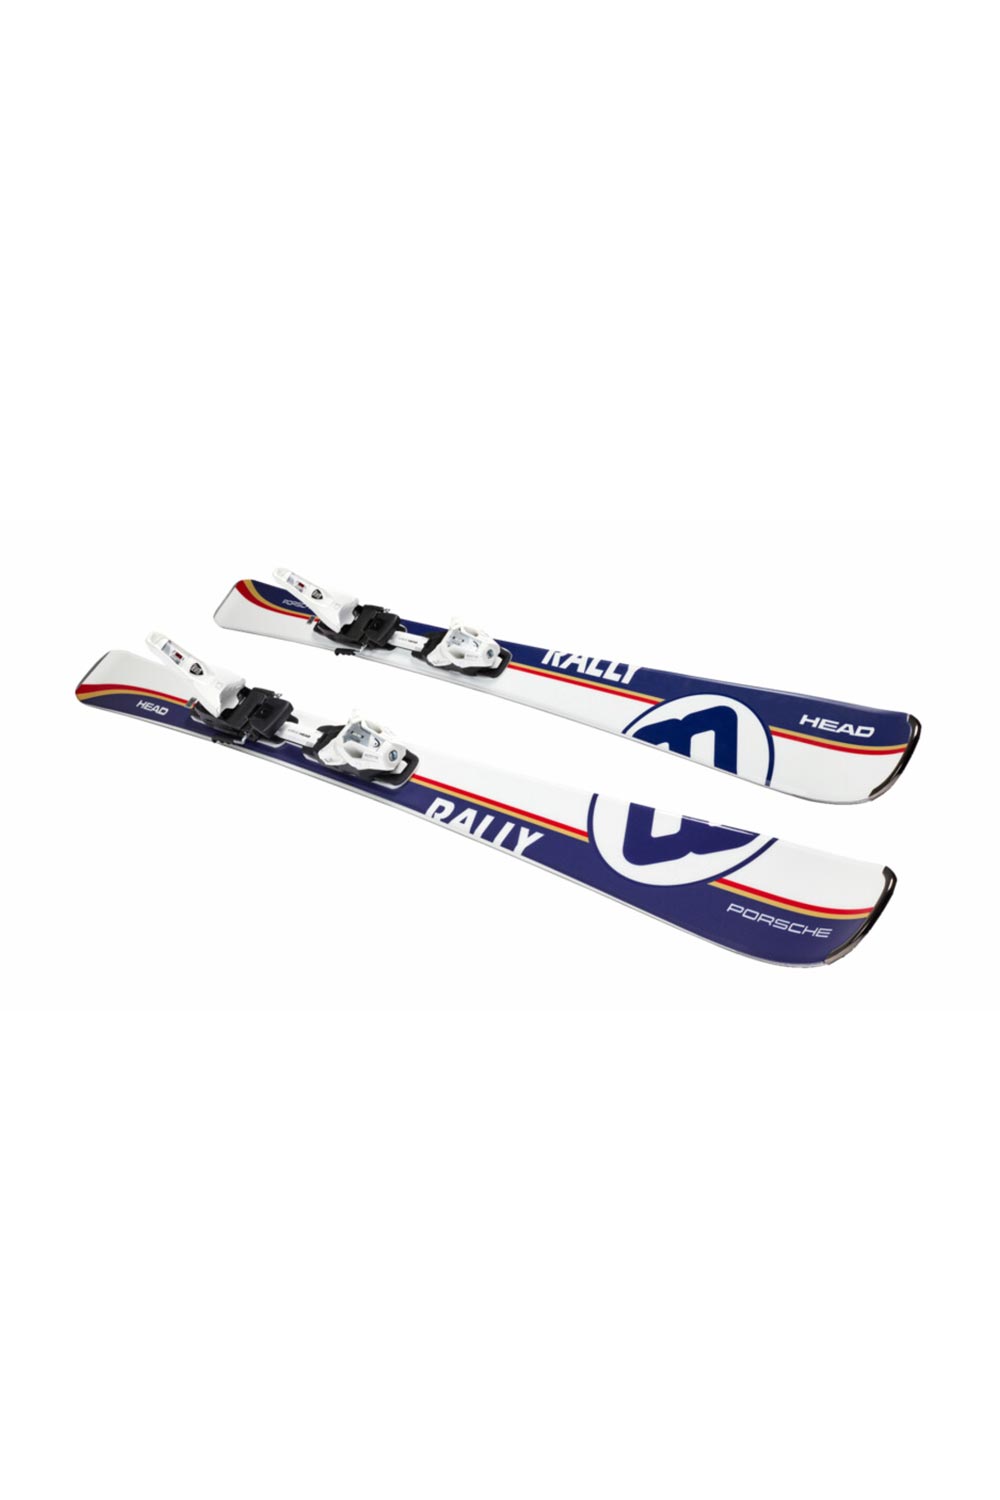 Head Porsche downhill skis with bindings, red white and blue rally graphic